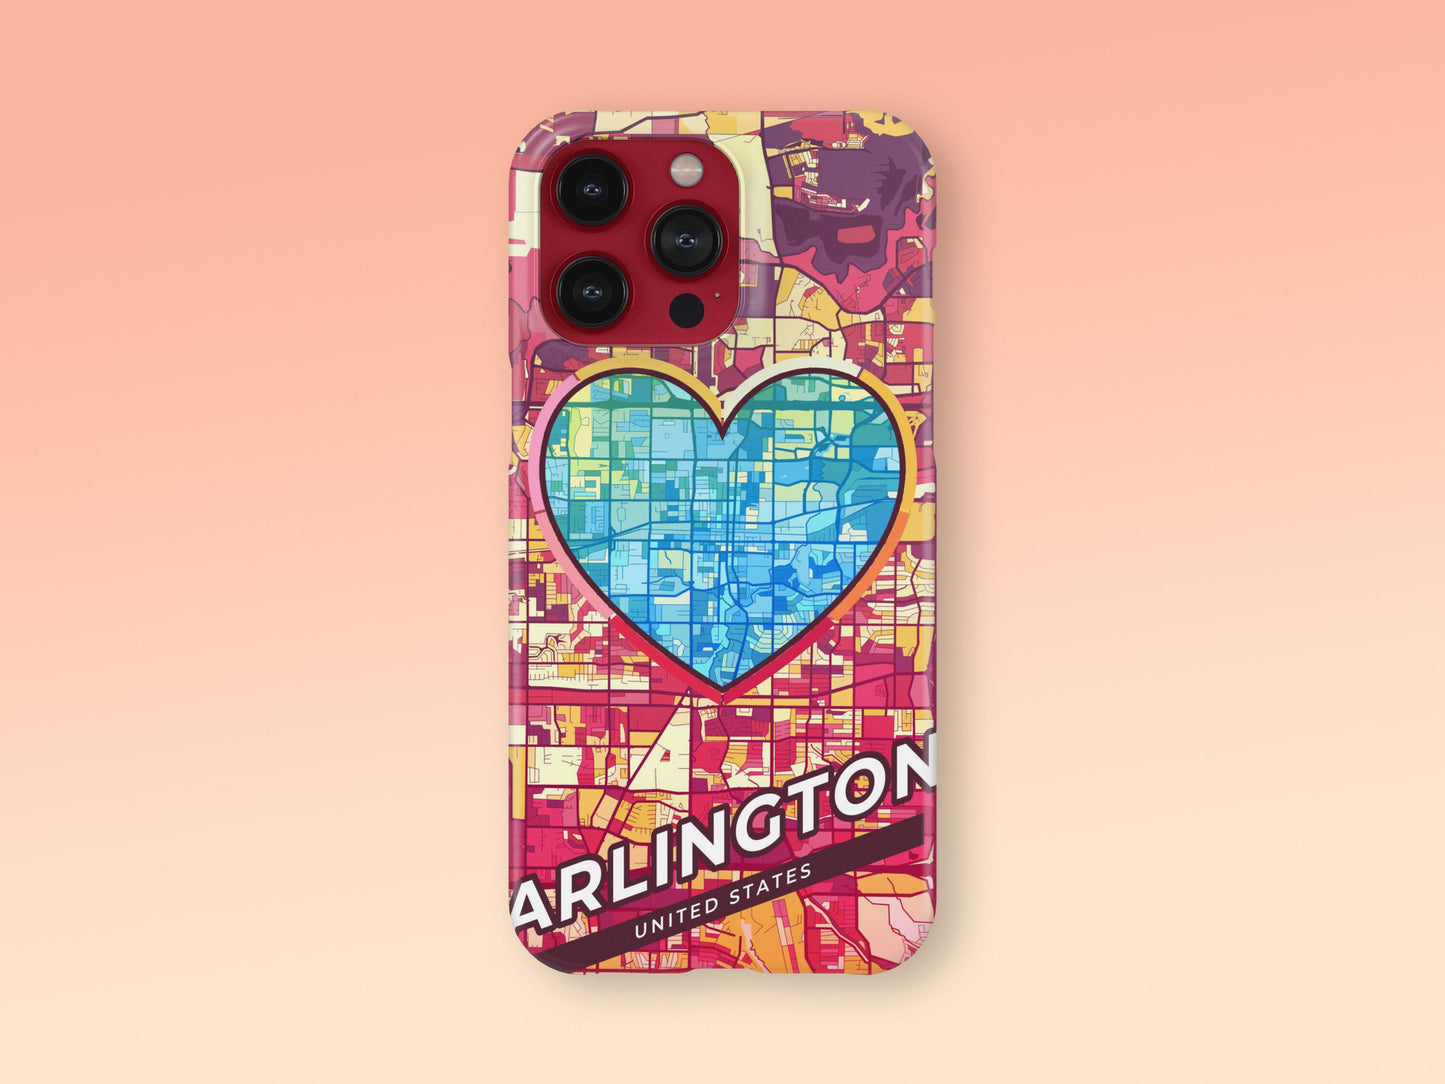 Arlington Texas slim phone case with colorful icon. Birthday, wedding or housewarming gift. Couple match cases. 2